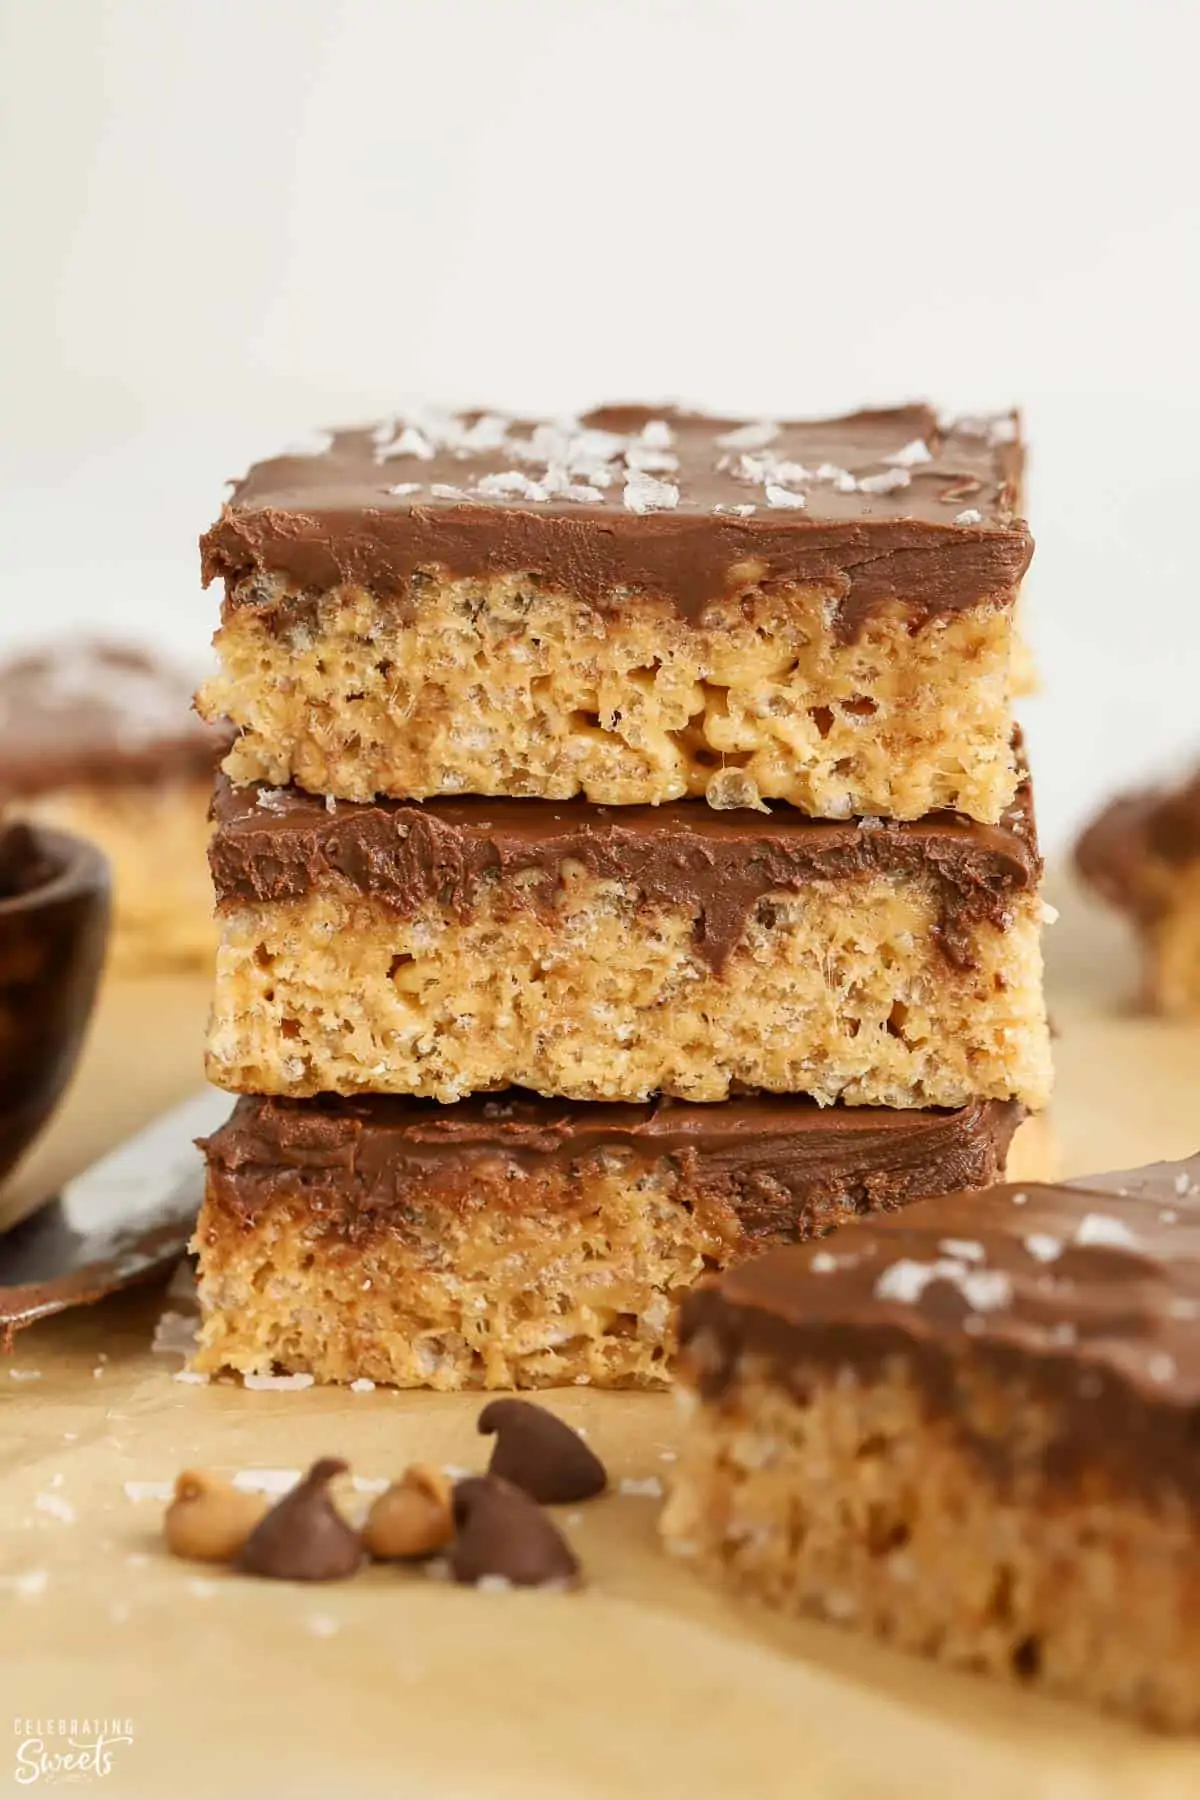 Stack of three peanut butter rice krispies treats topped with chocolate frosting.